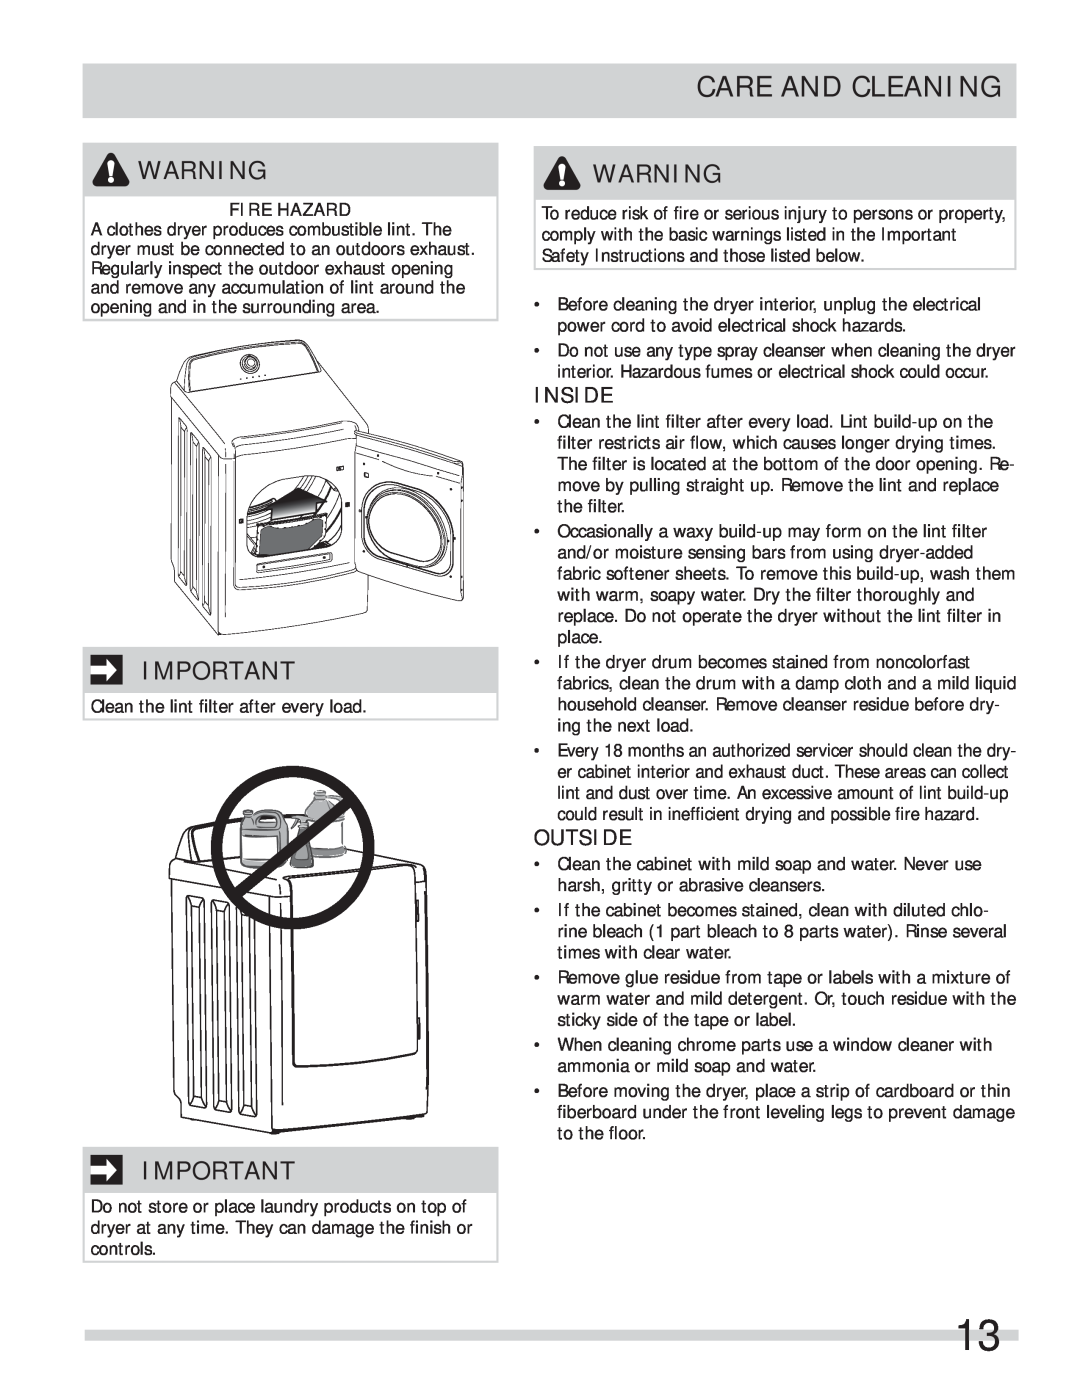 Frigidaire 137409900A(1111) important safety instructions Care And Cleaning, Inside, Outside, Fire Hazard 